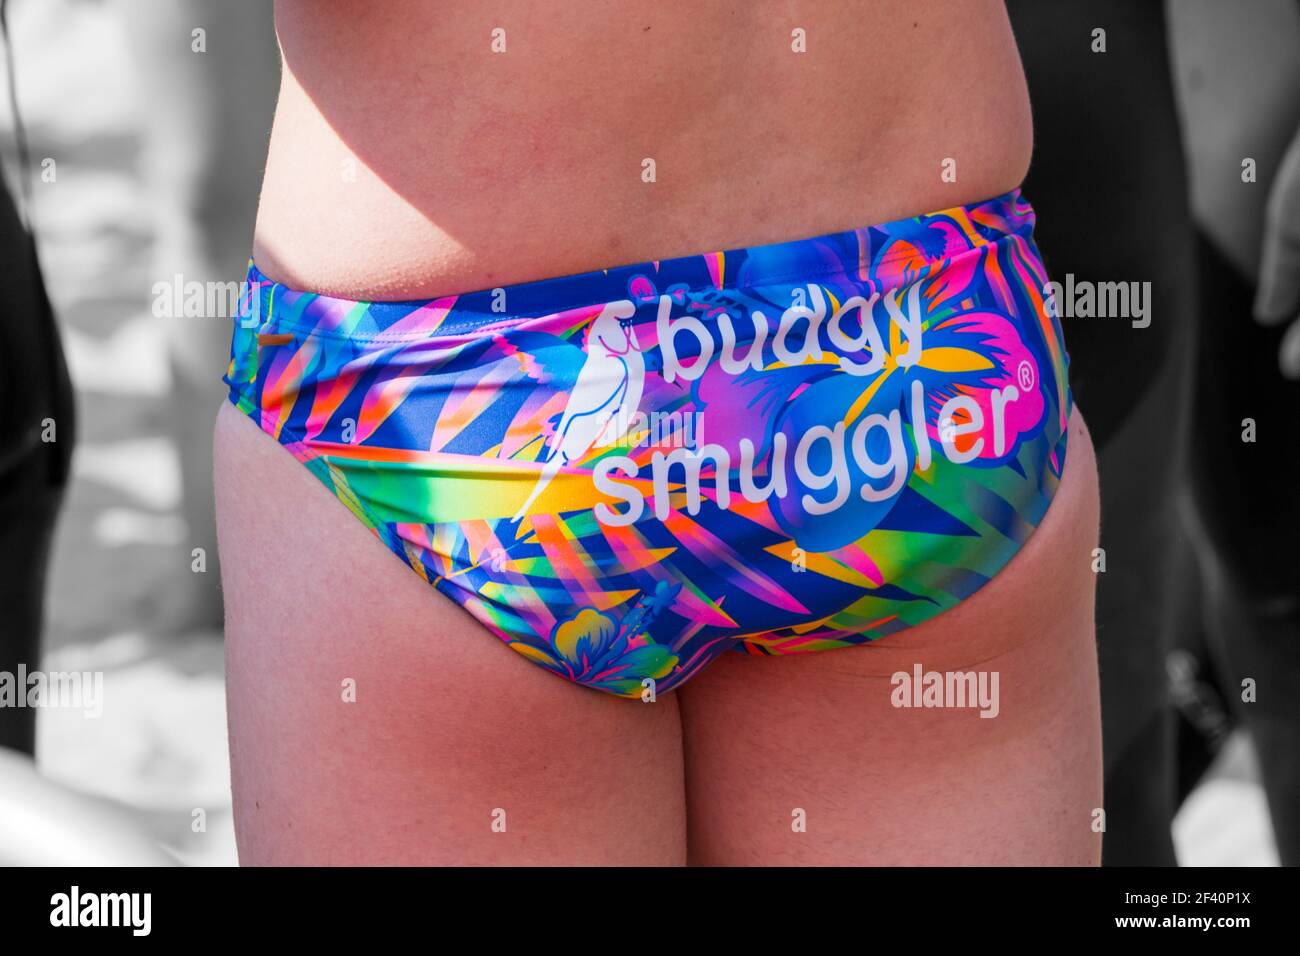 Man wearing budgy smuggler swimming trunks at Bournemouth, Dorset UK in August Stock Photo